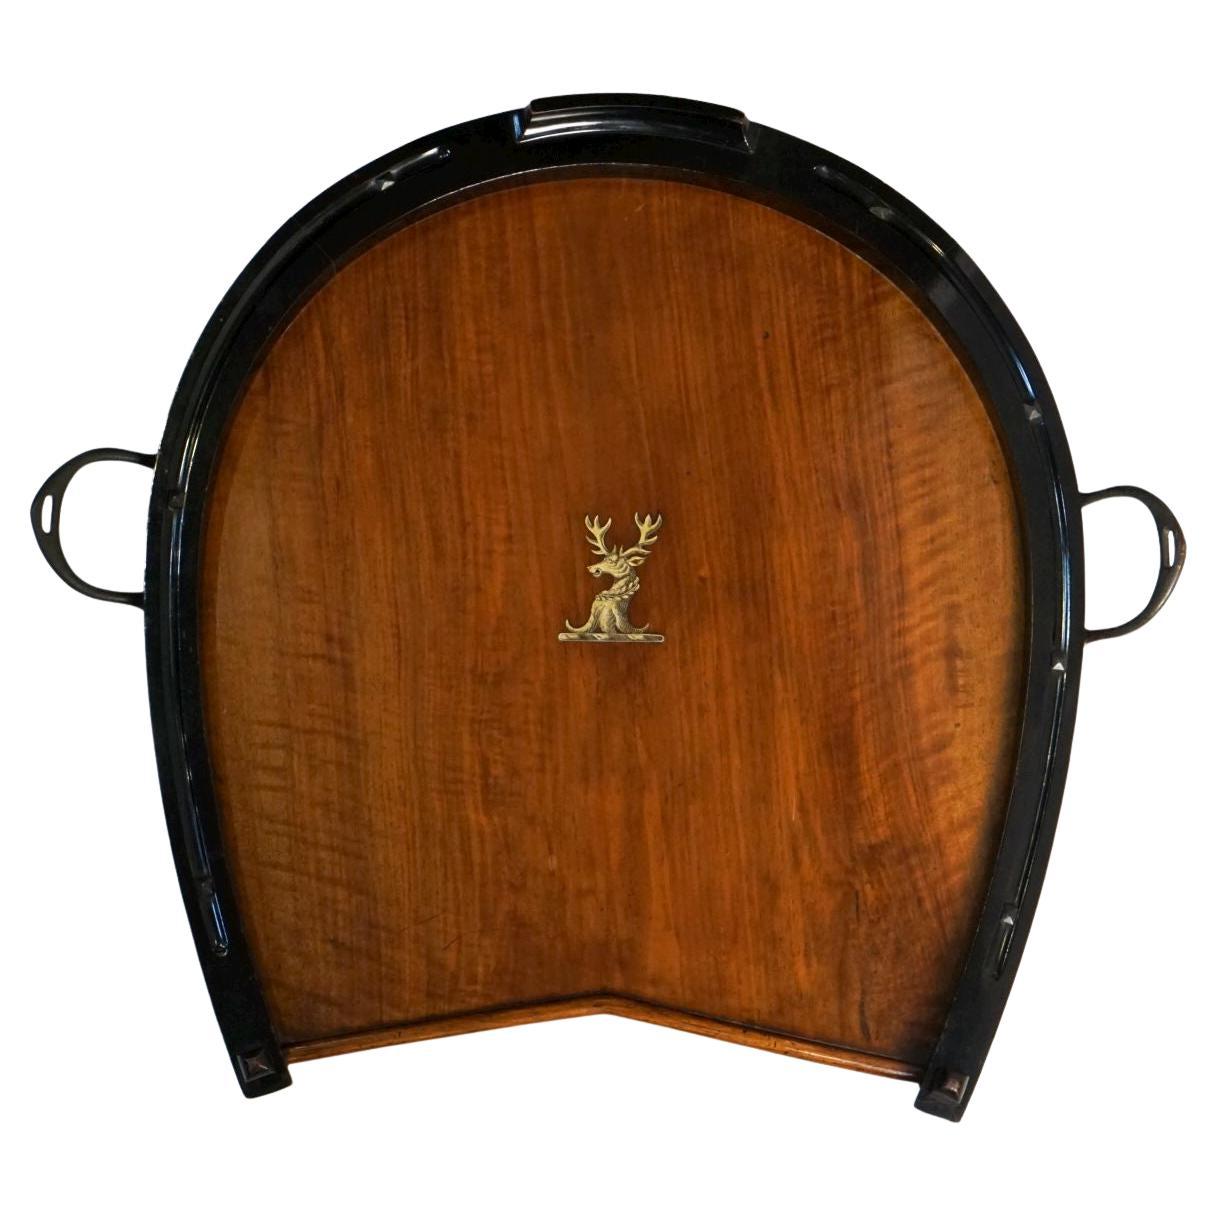 Horseshoe-Shaped Tray of Walnut with Inlaid Brass Stag from England